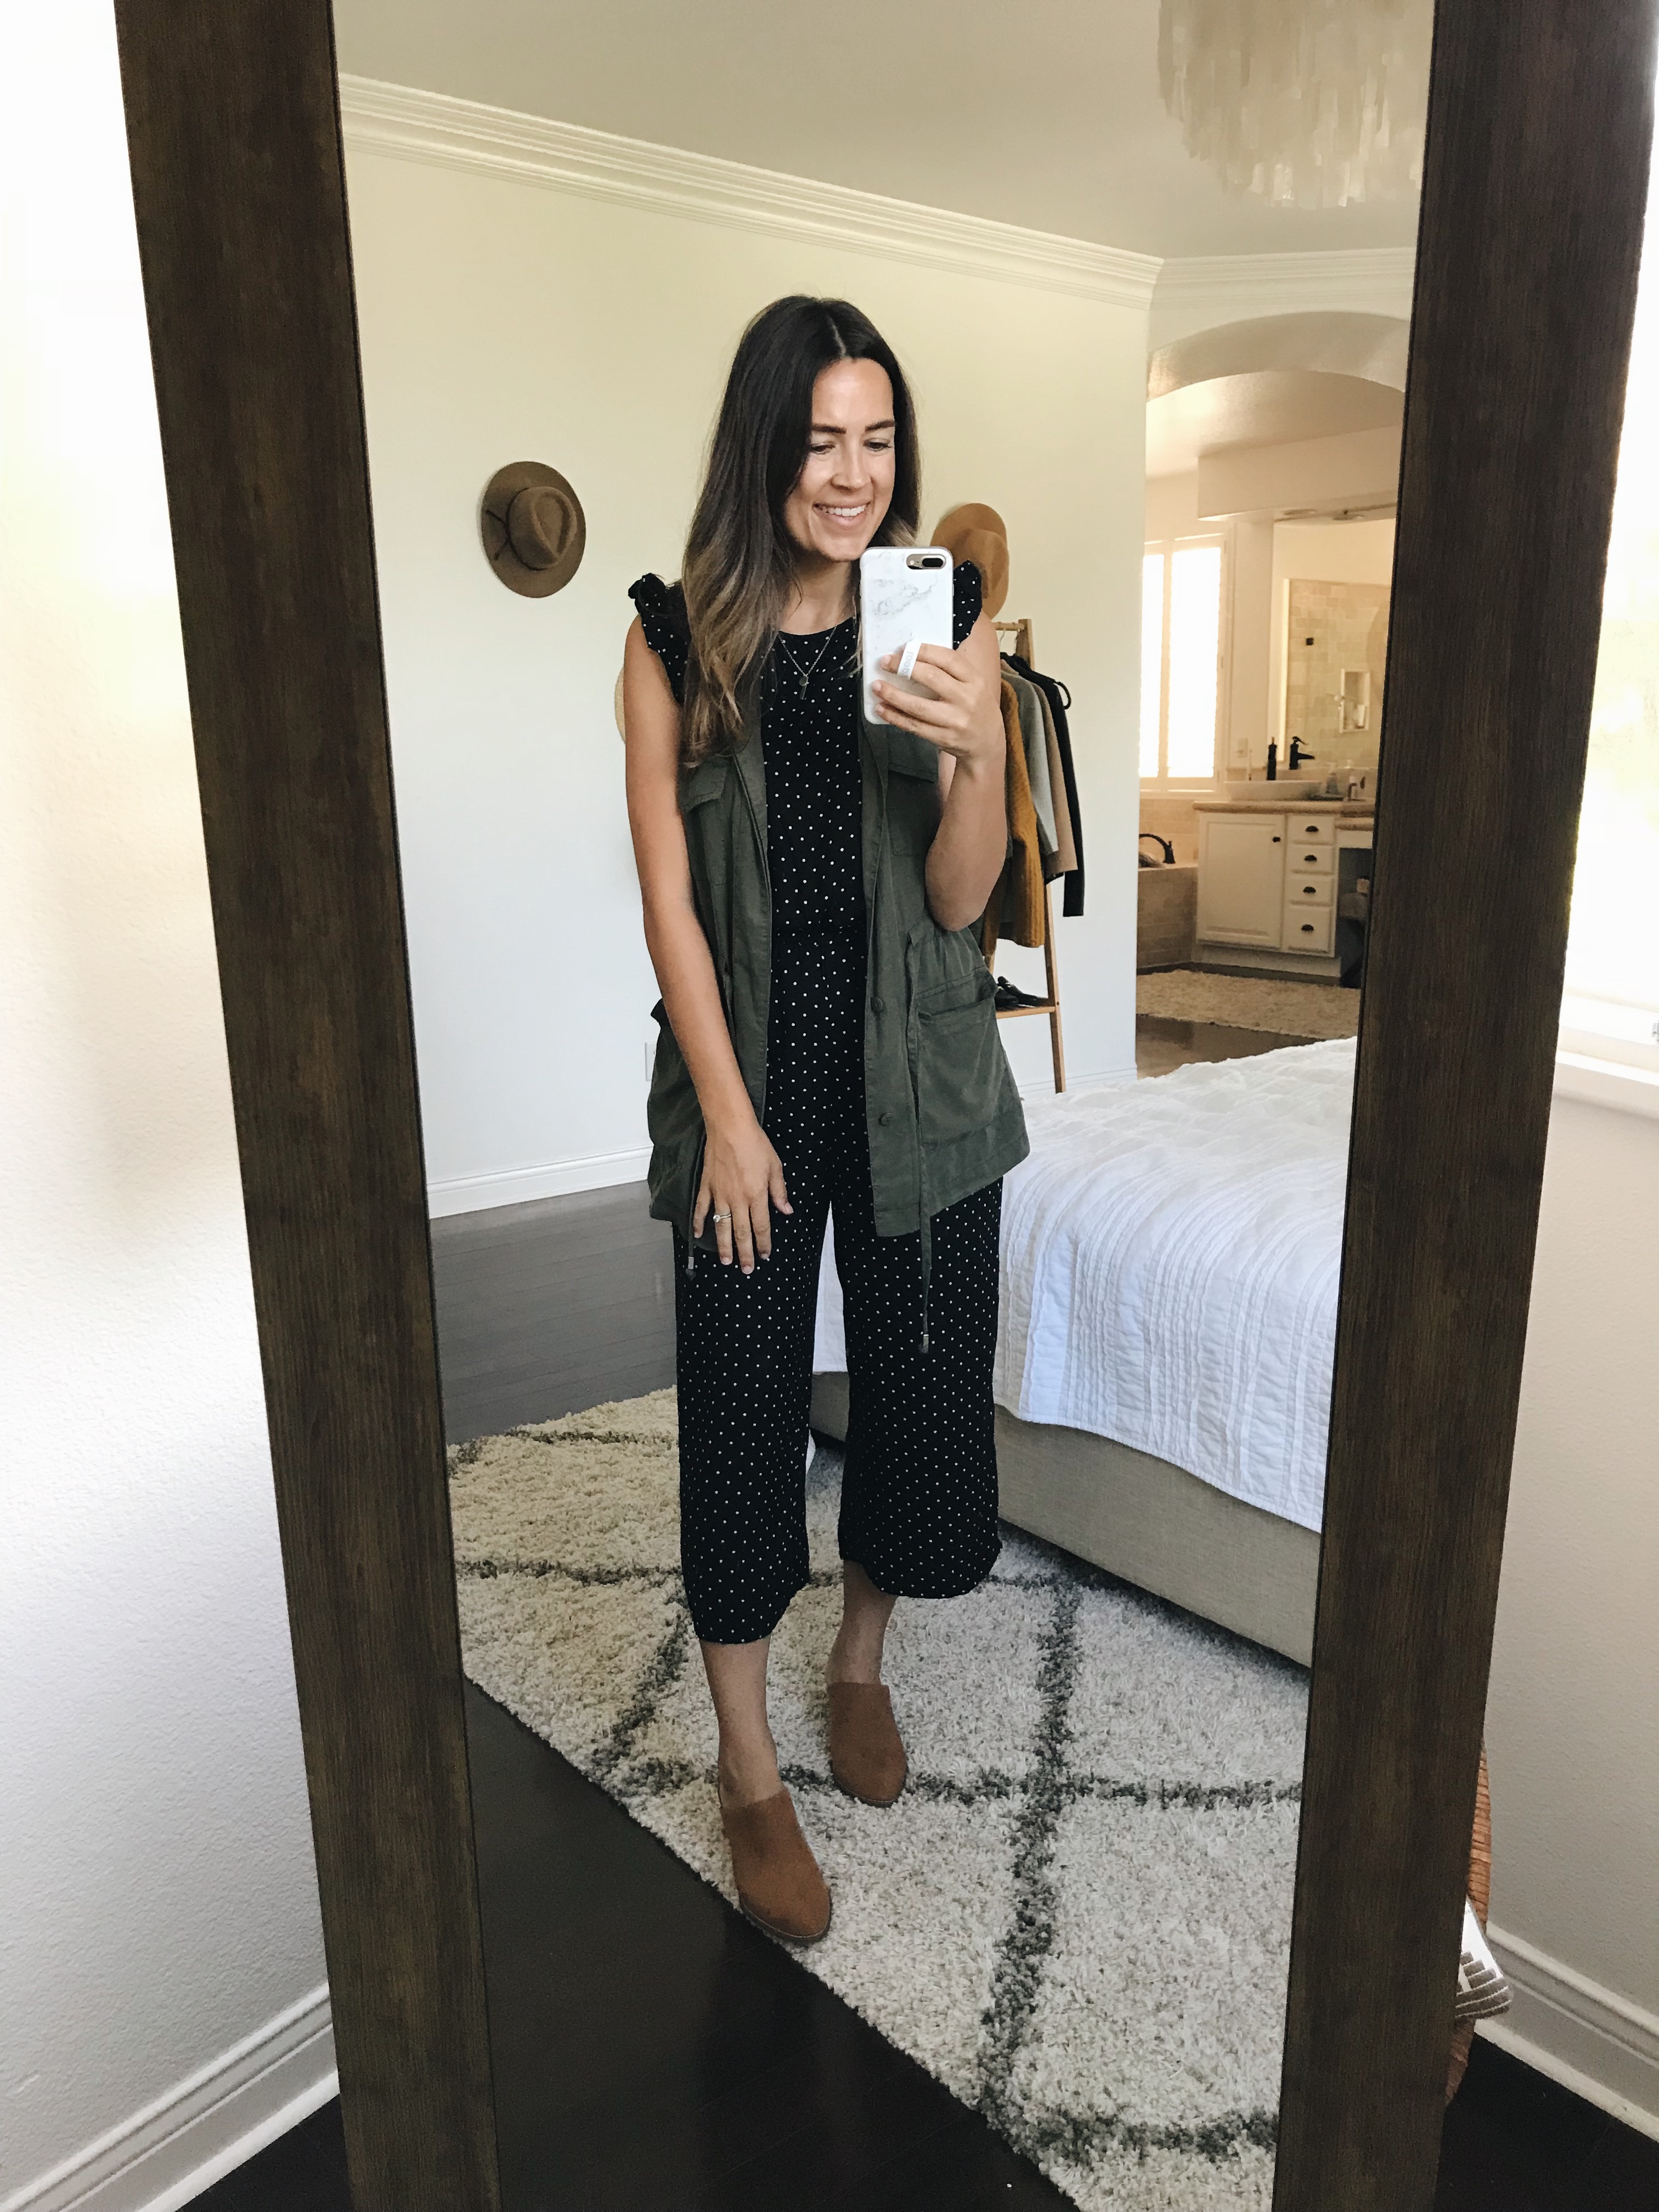 18 Jumpsuit Outfits for One-and-Done Fall Looks